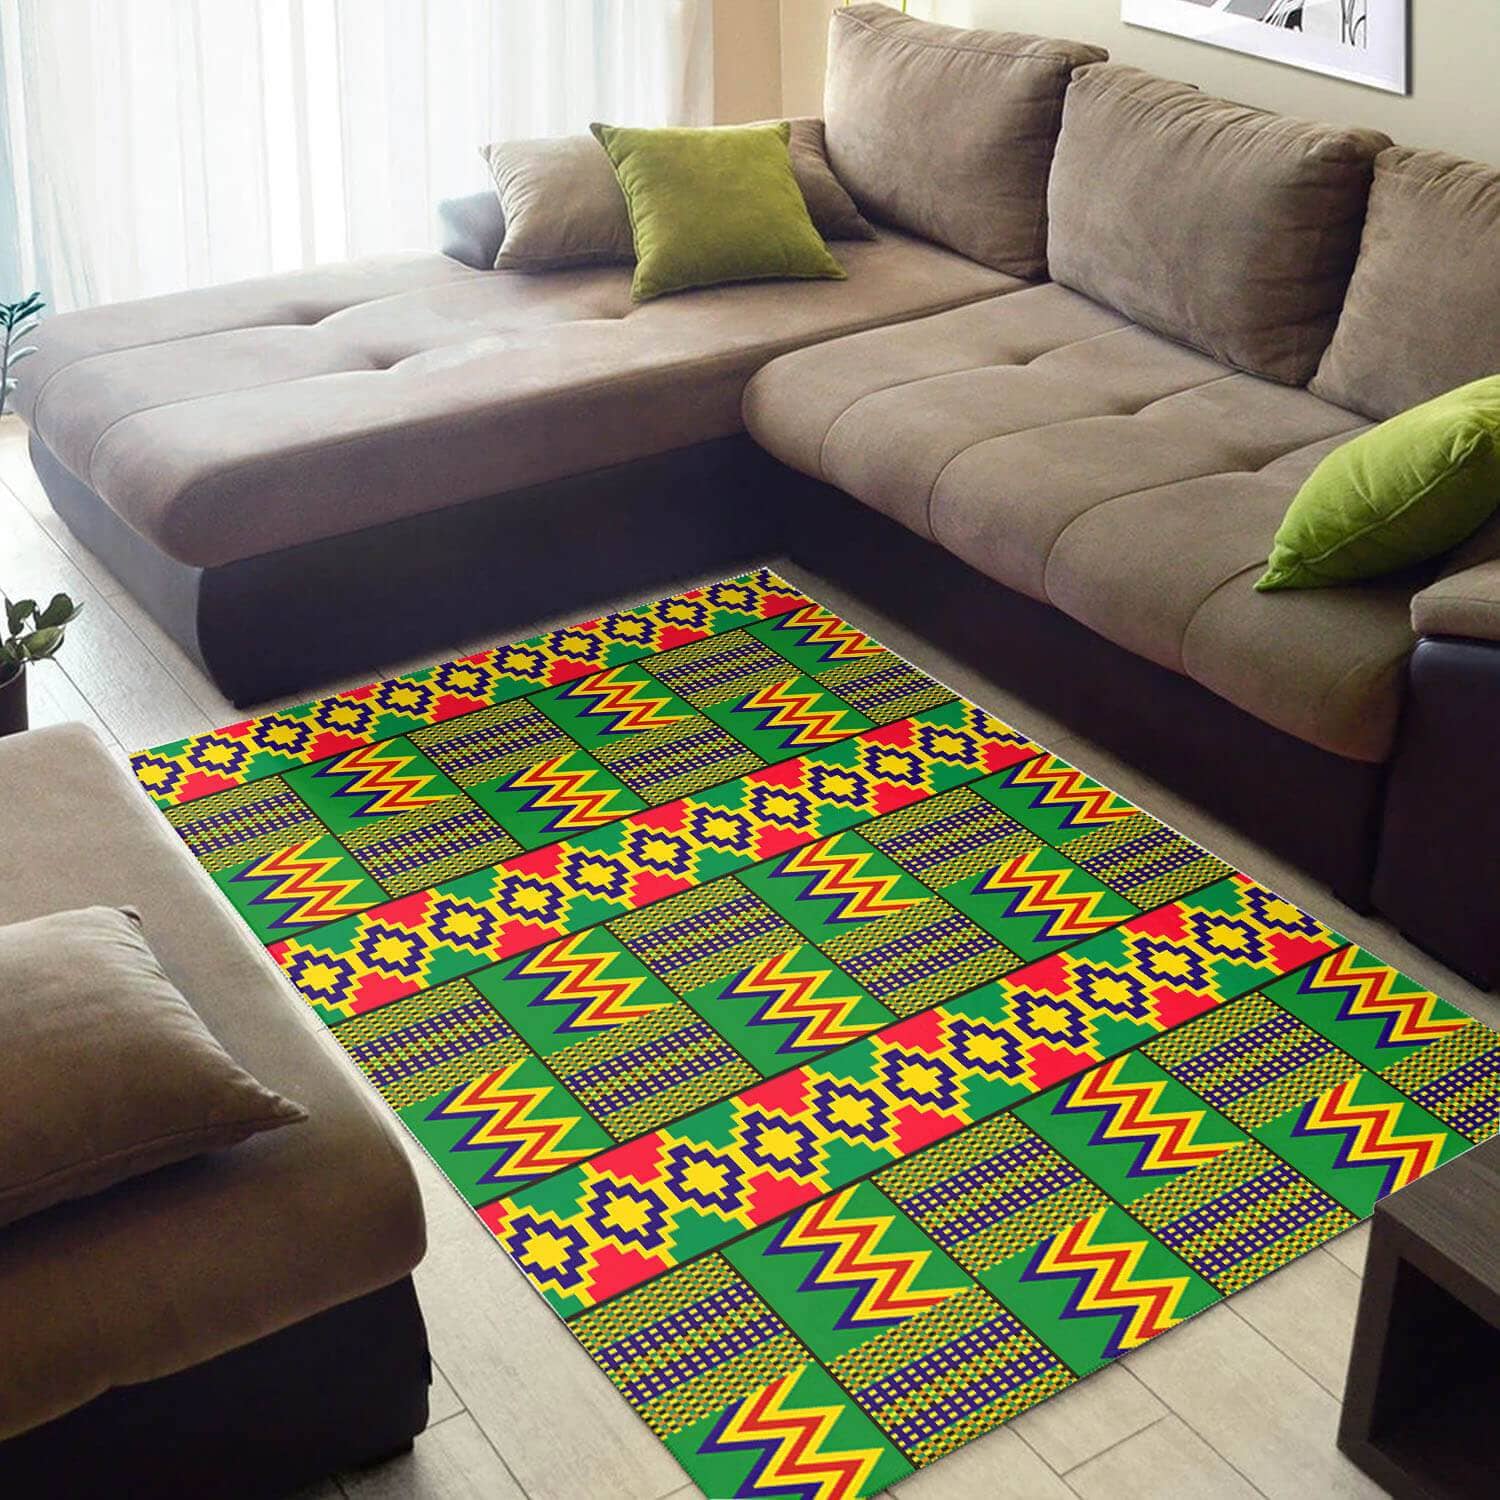 Beautiful African American Graphic Afro Ethnic Seamless Pattern Design Floor Carpet Inspired Living Room Rug